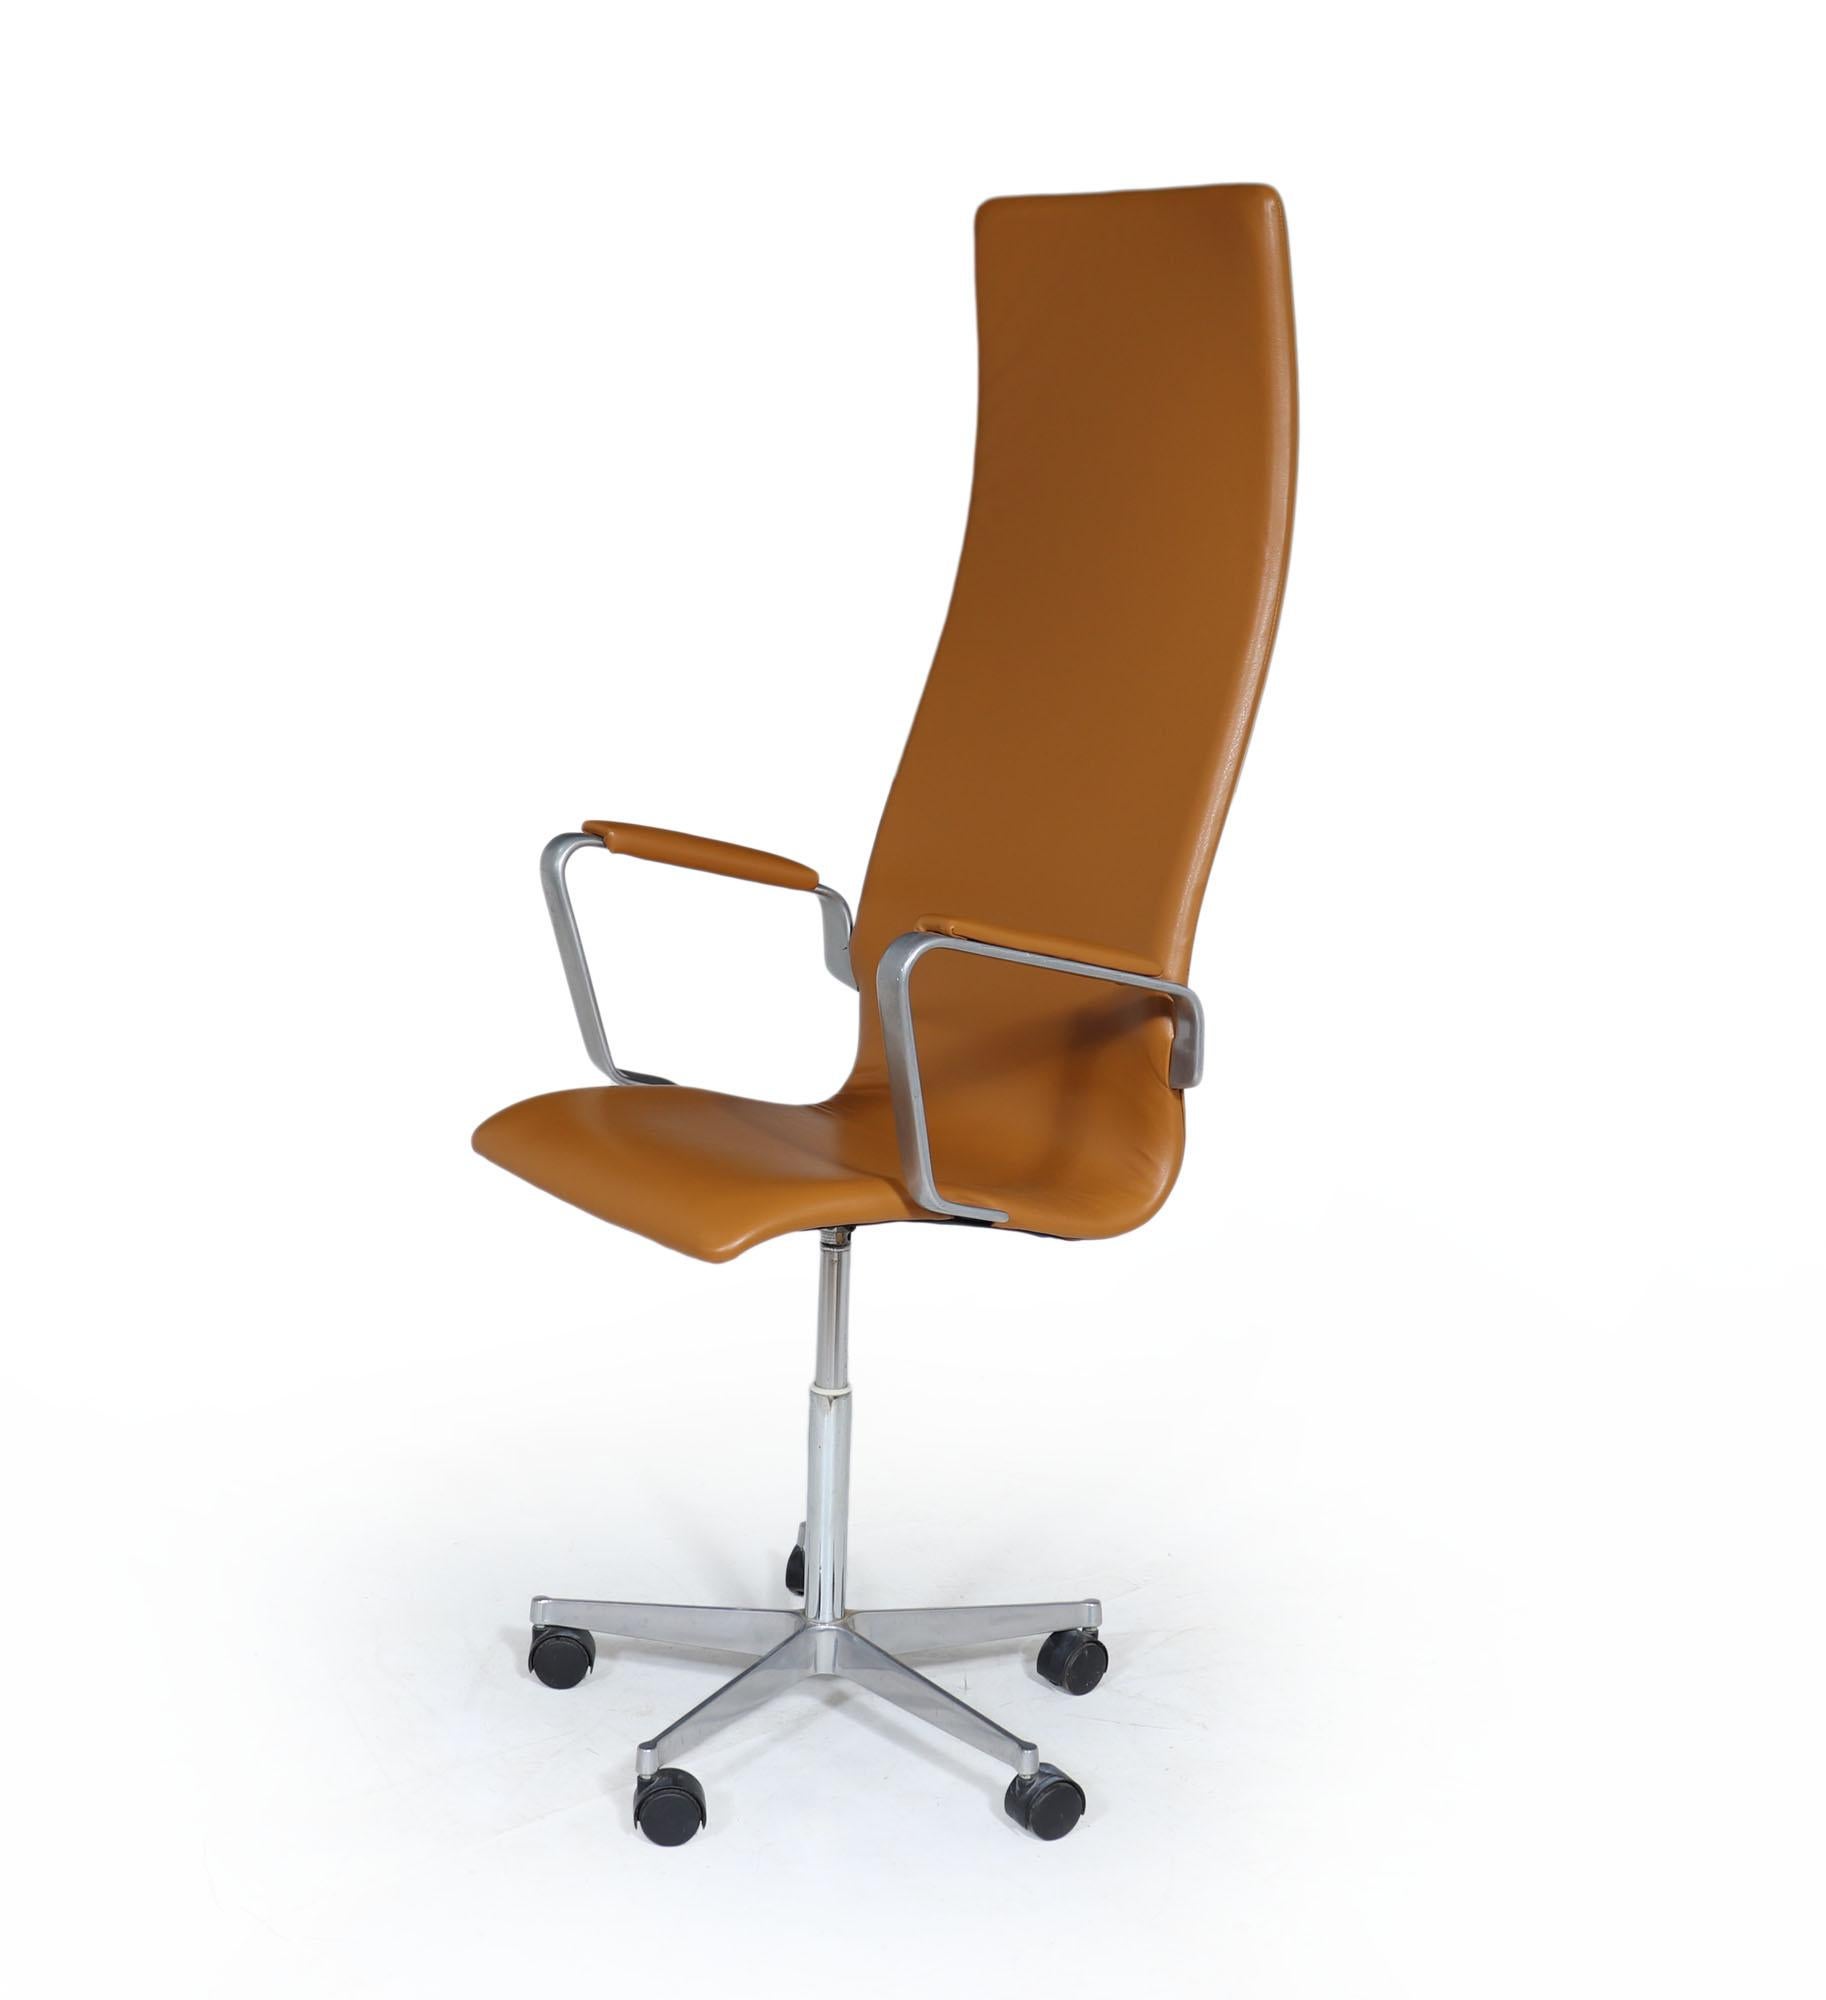 Oxford desk chair - Arne Jacobsen - Fritz Hansen
The ‘Oxford’ desk chair designed by Arne Jacobsen in 1963 and this original version was produced Denmark in 1976 by Fritz Hansen. This is the executive high back model as seen in ‘The Apprentice’